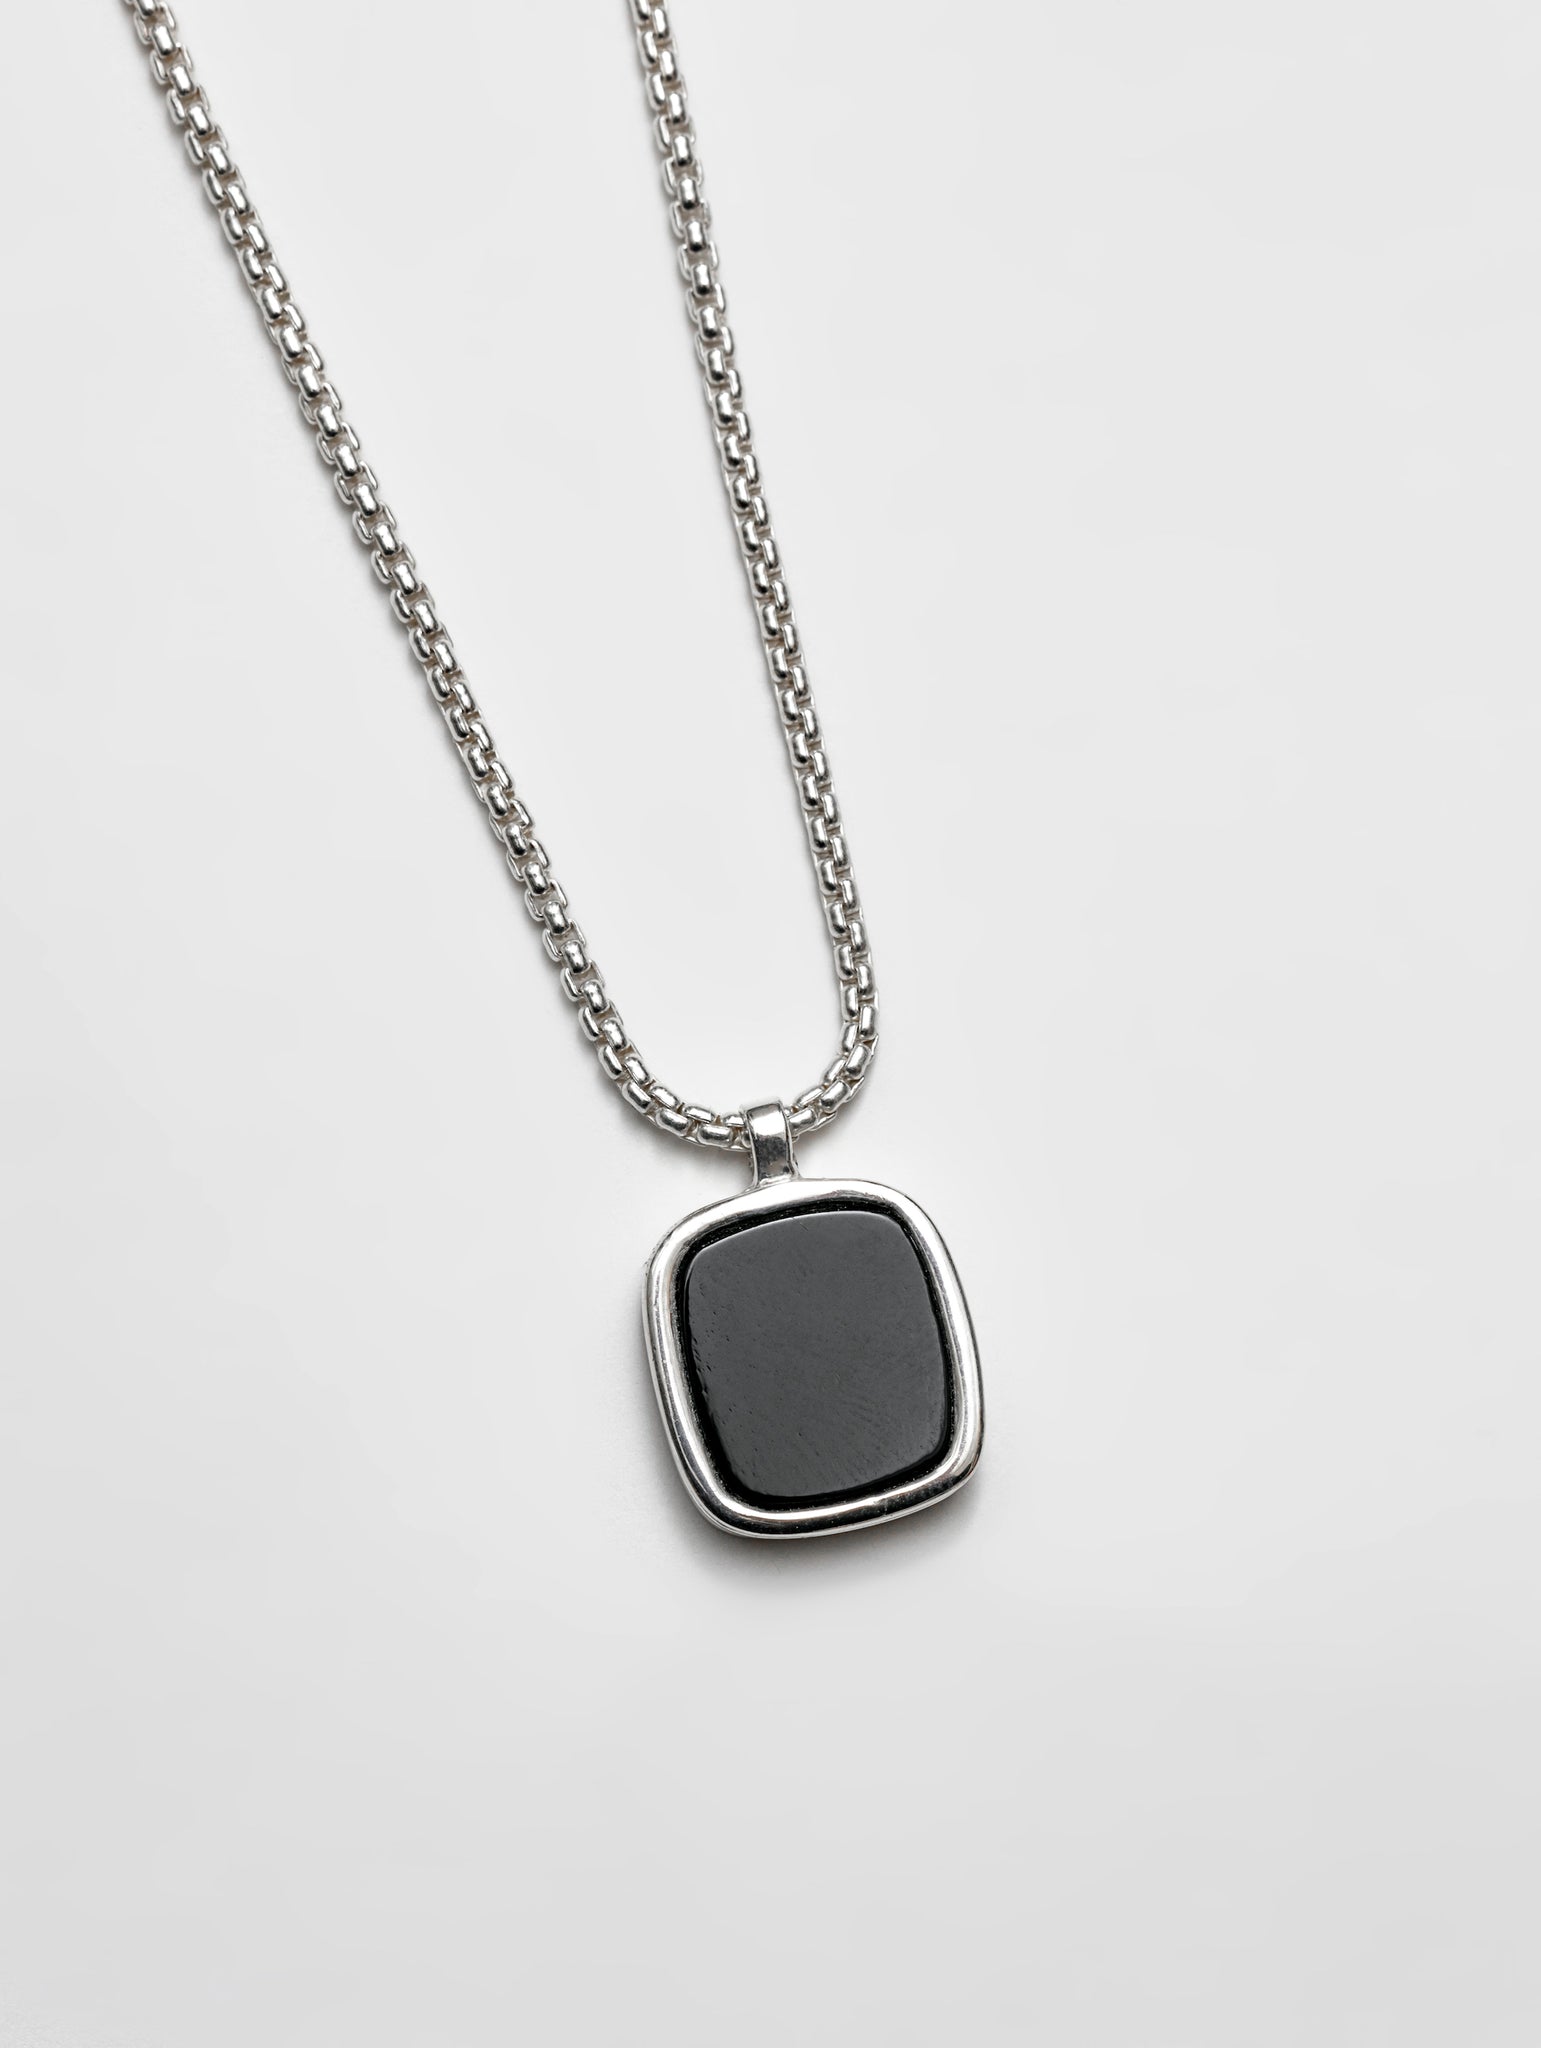 Wolf Circus Classic Unisex Square Natural Gemstone Pendant Necklace Black Stone 925 Sterling Silver Jewelry